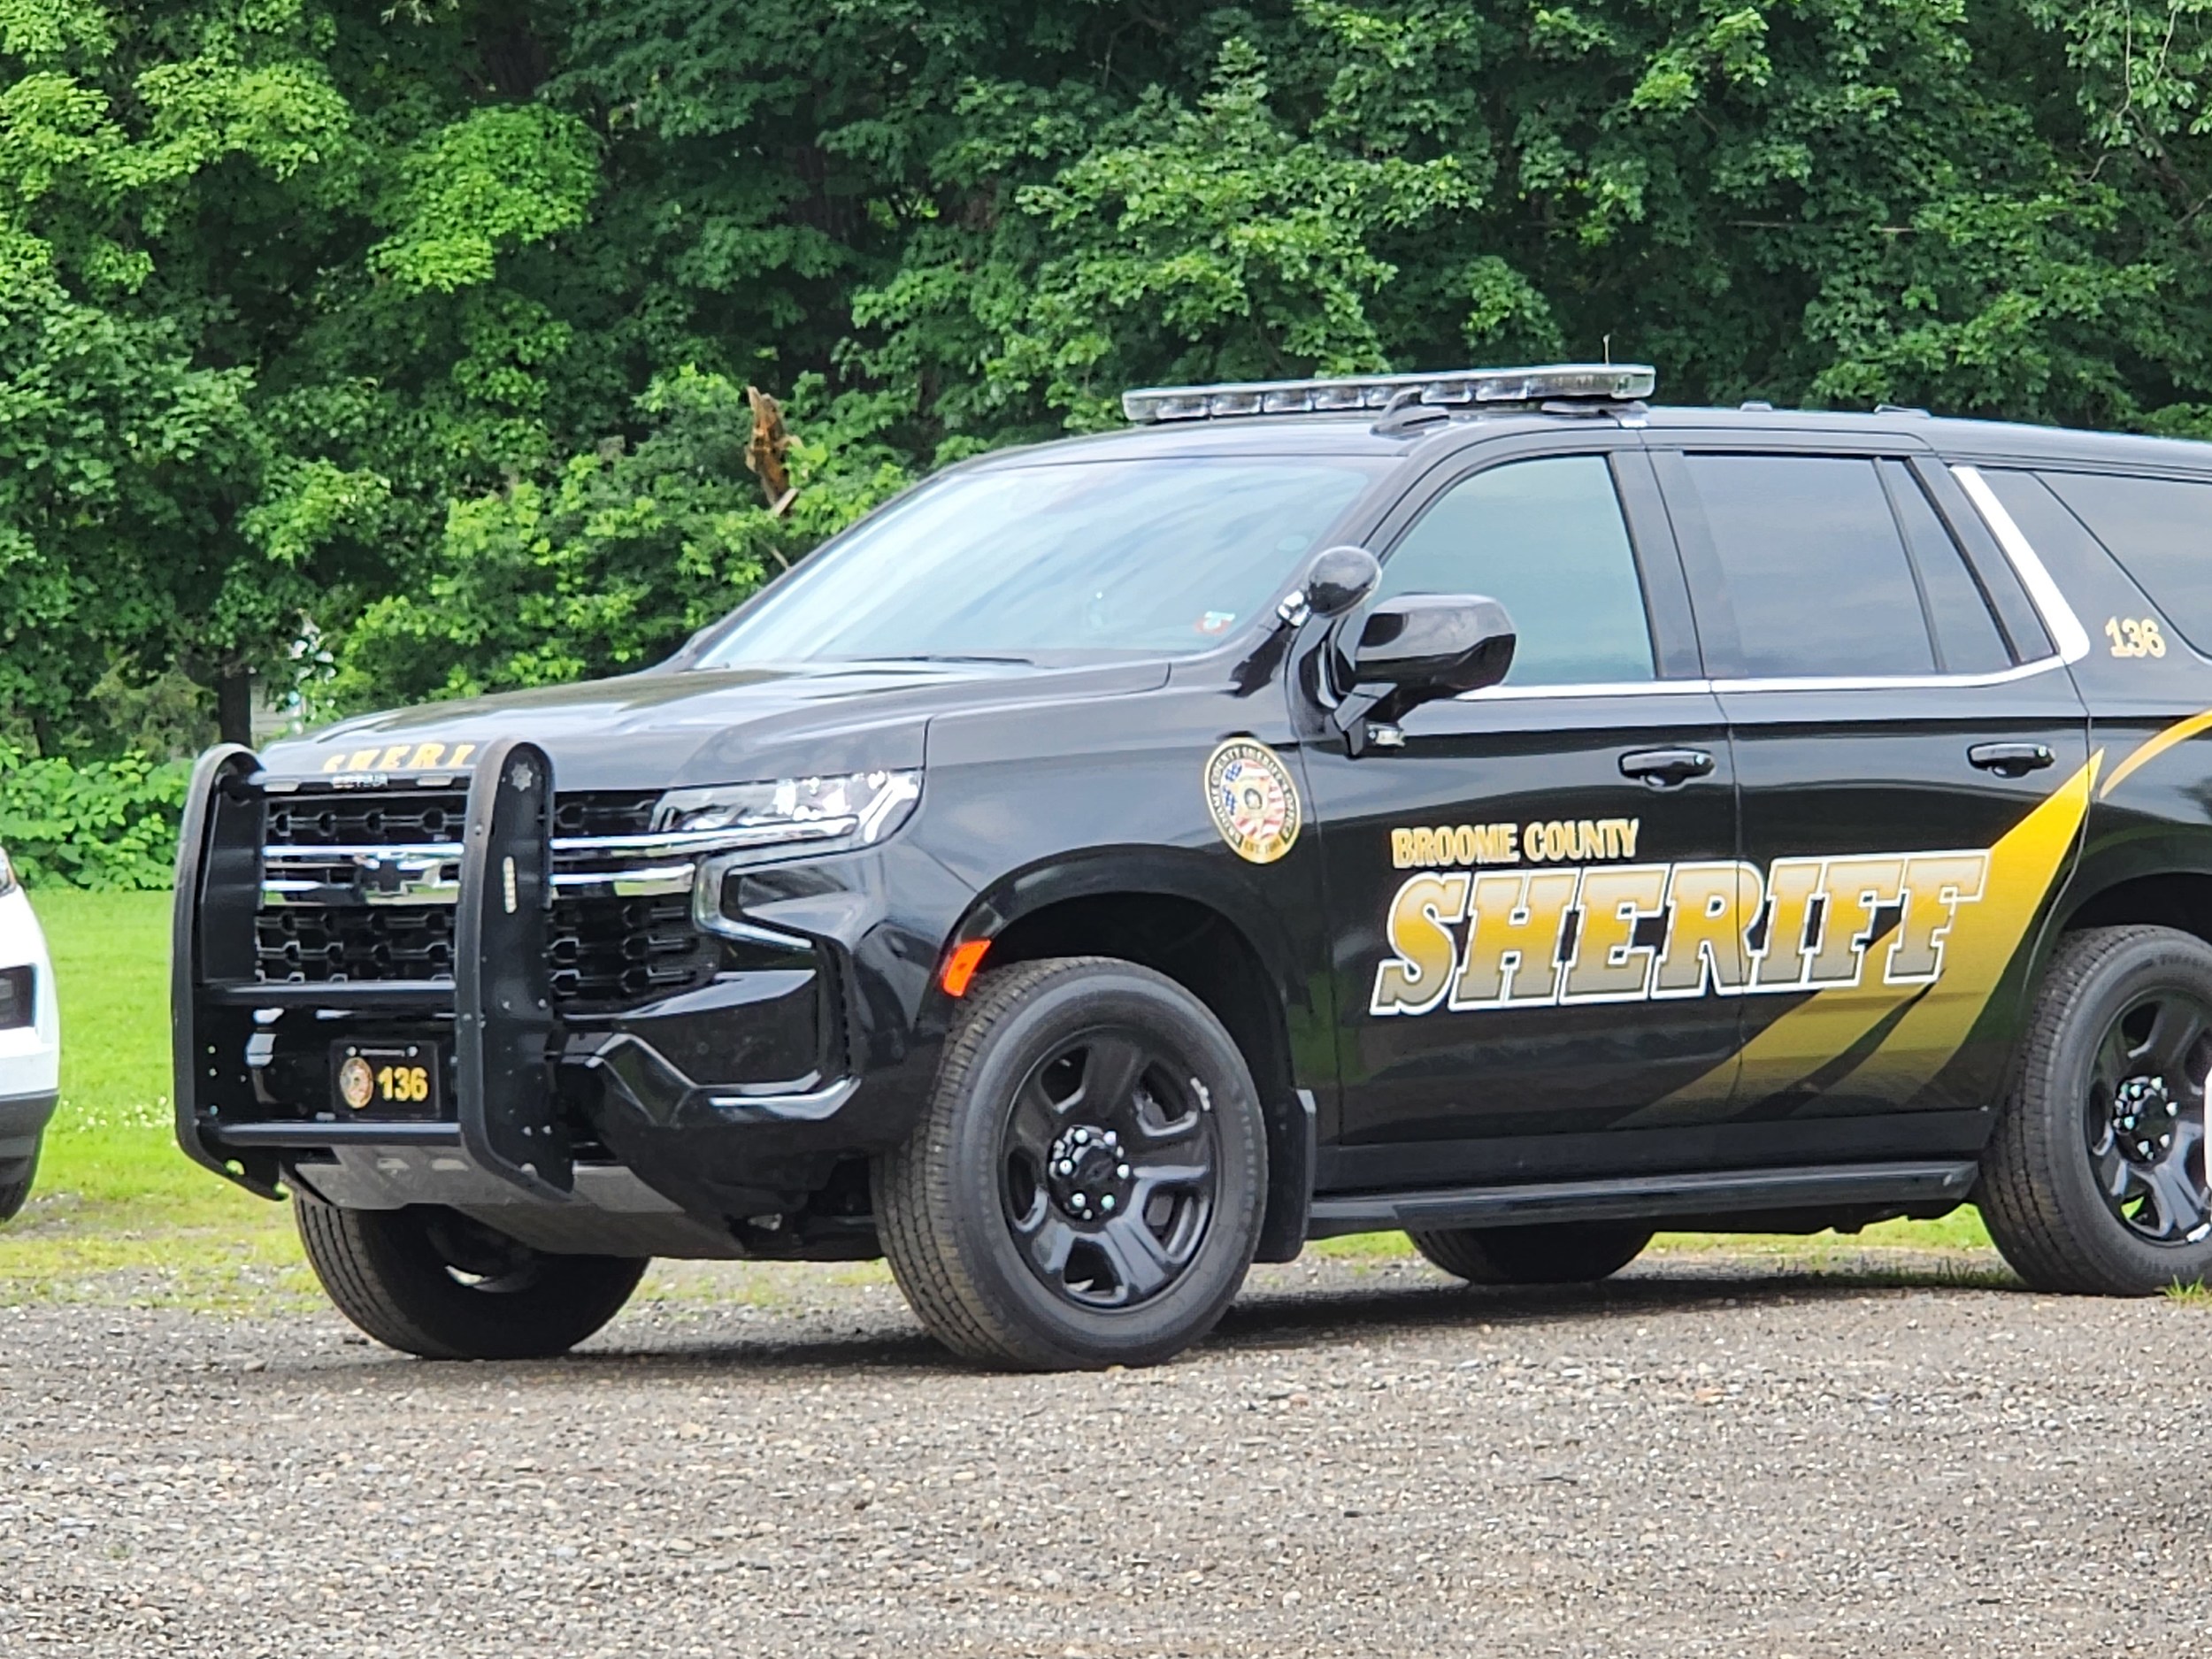 New Broome County Sheriff Patrol Vehicles Will Sport a New Look photo